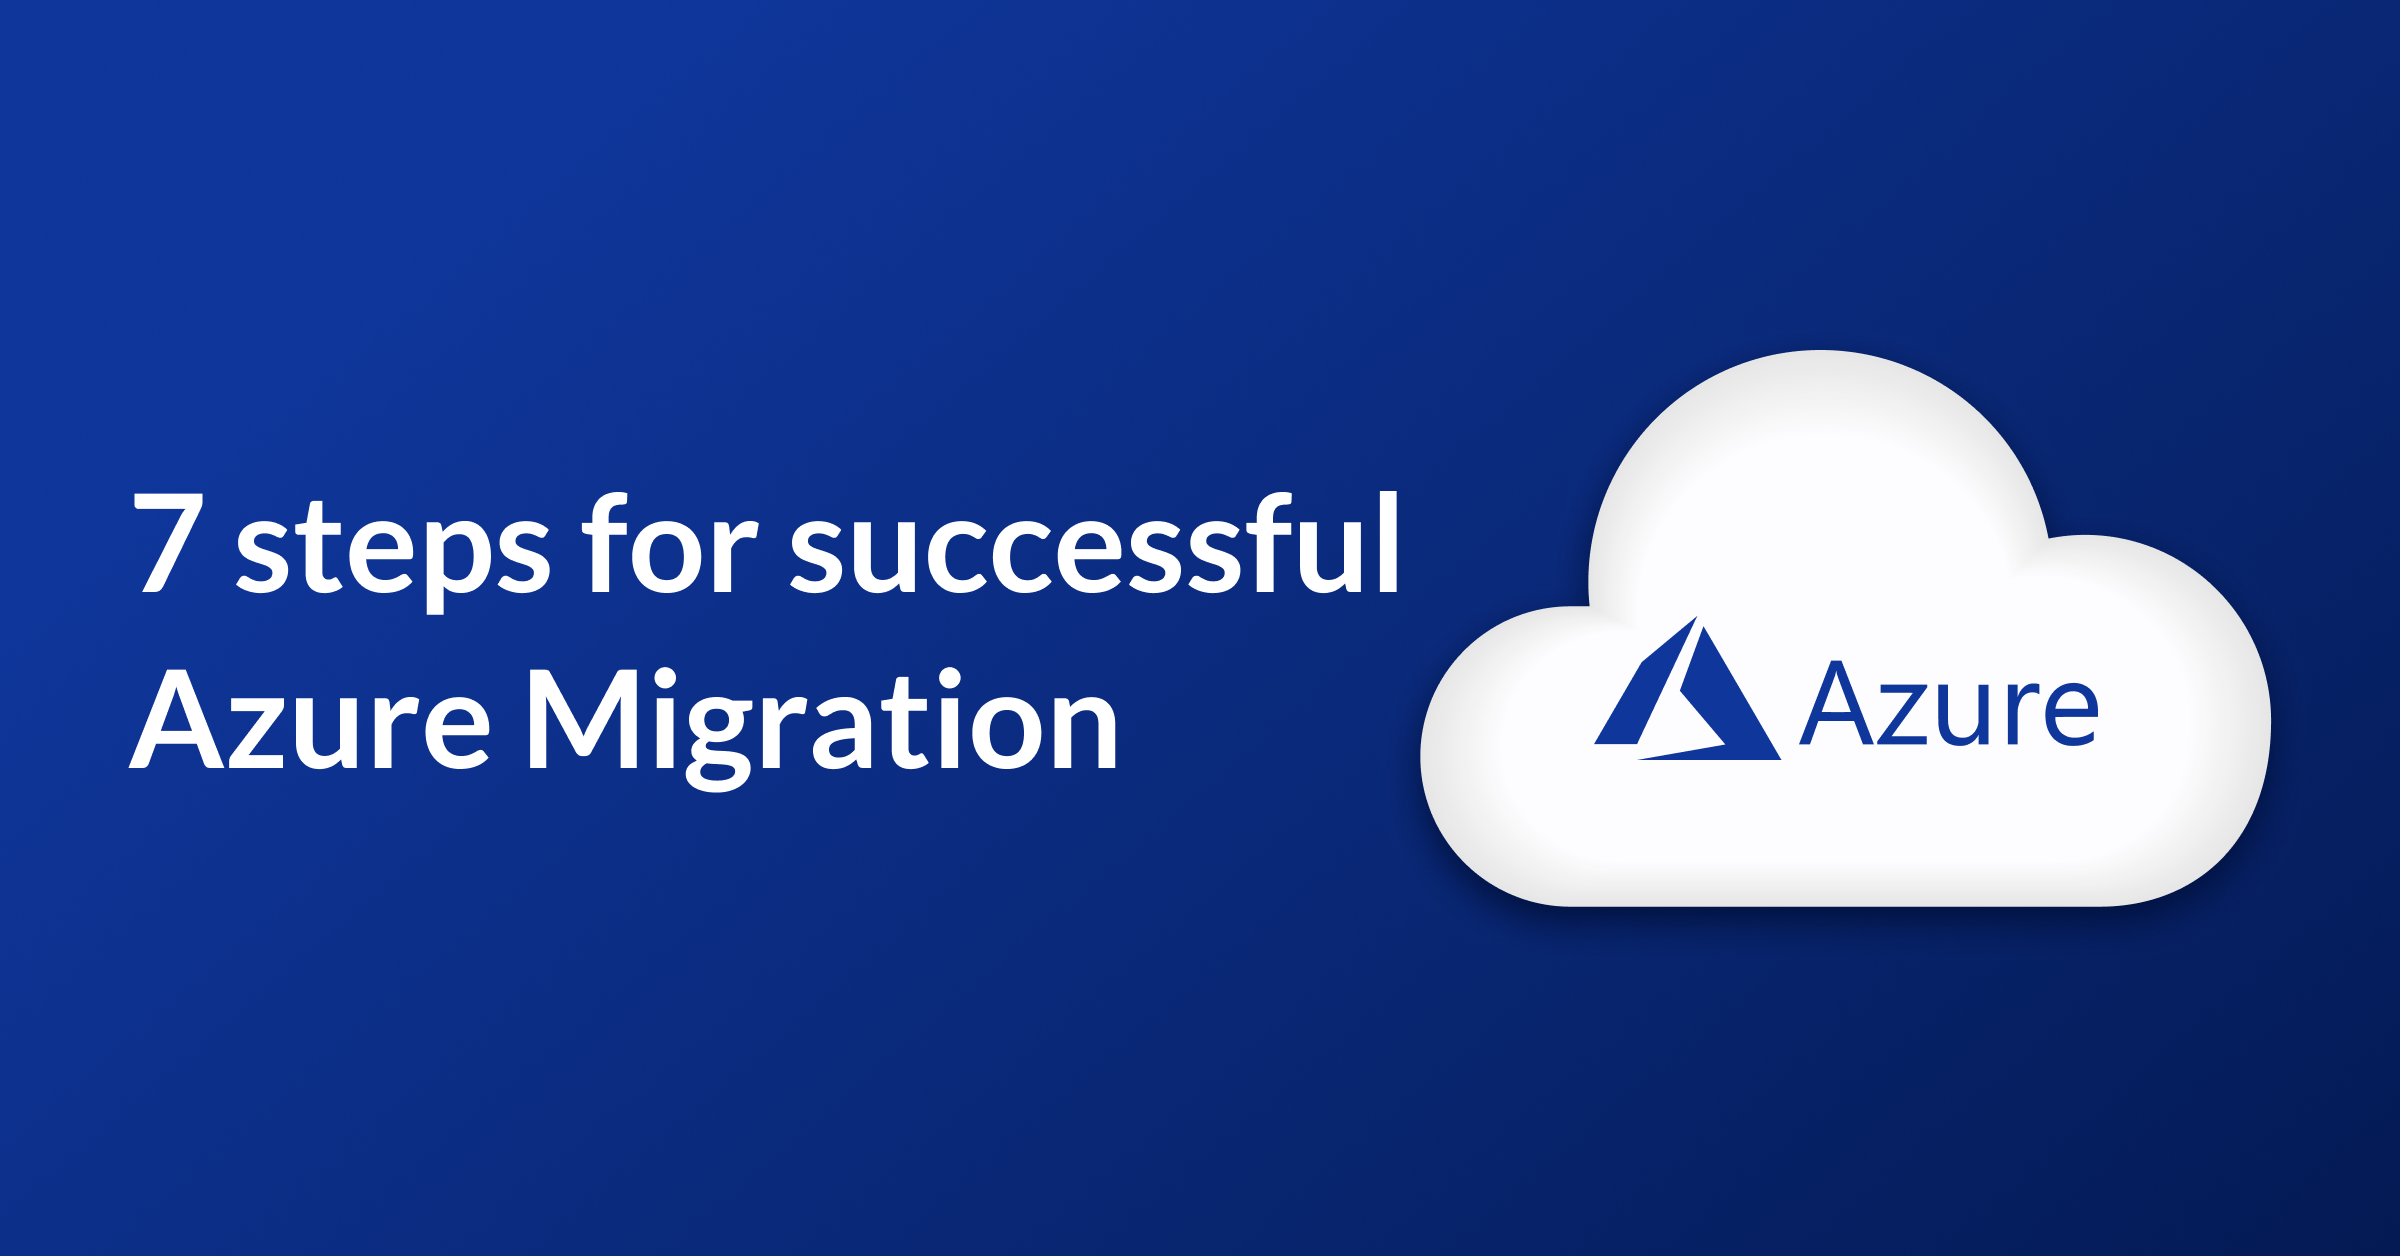 7 Steps for successful  Azure Migration@2x (1).png